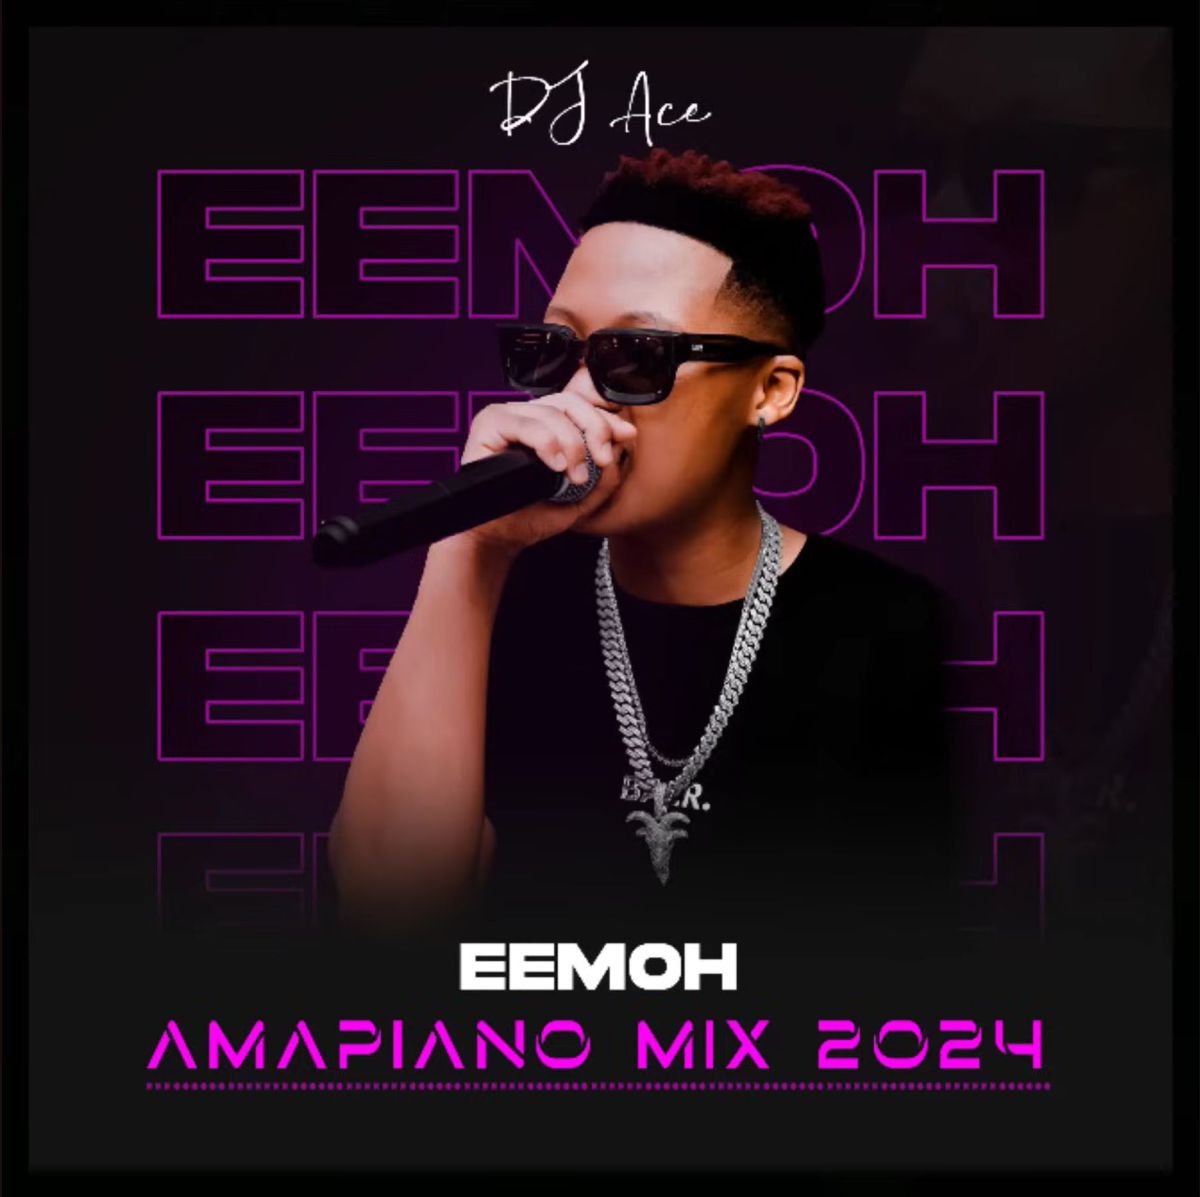 Dj Ace – Strictly Eemoh Amapiano Mix 1